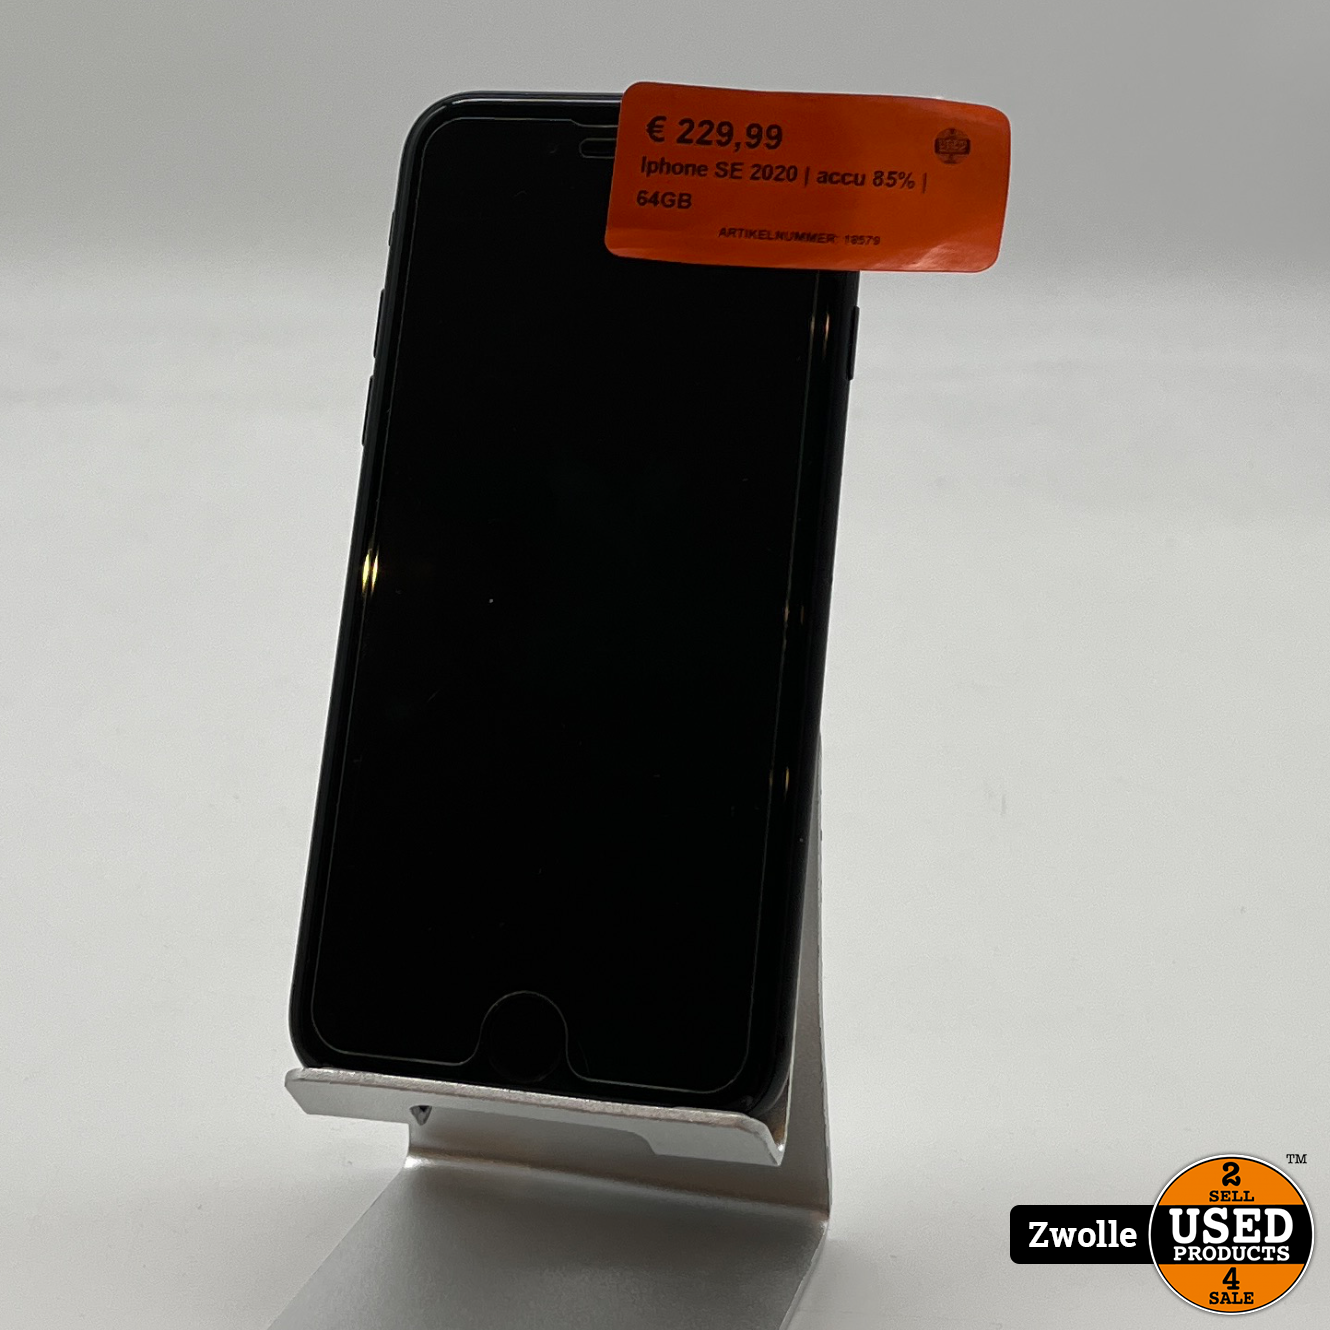 Perseus dosis afgunst Iphone SE 2020 | accu 85% | 64GB - Used Products Zwolle